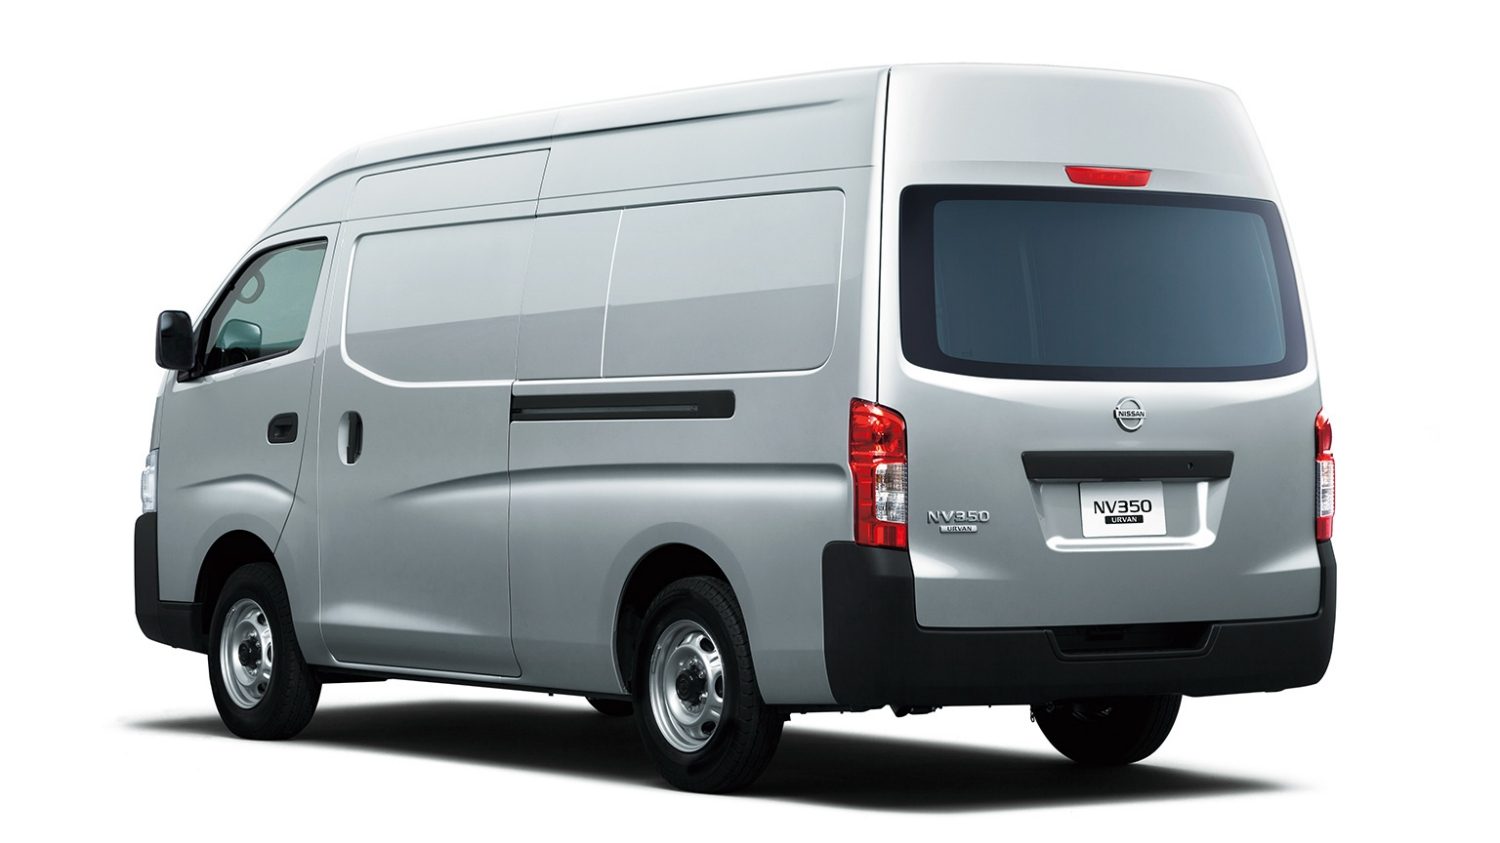 Nissan NV350 URVAN  AT 6 seater for rent from Rentflex